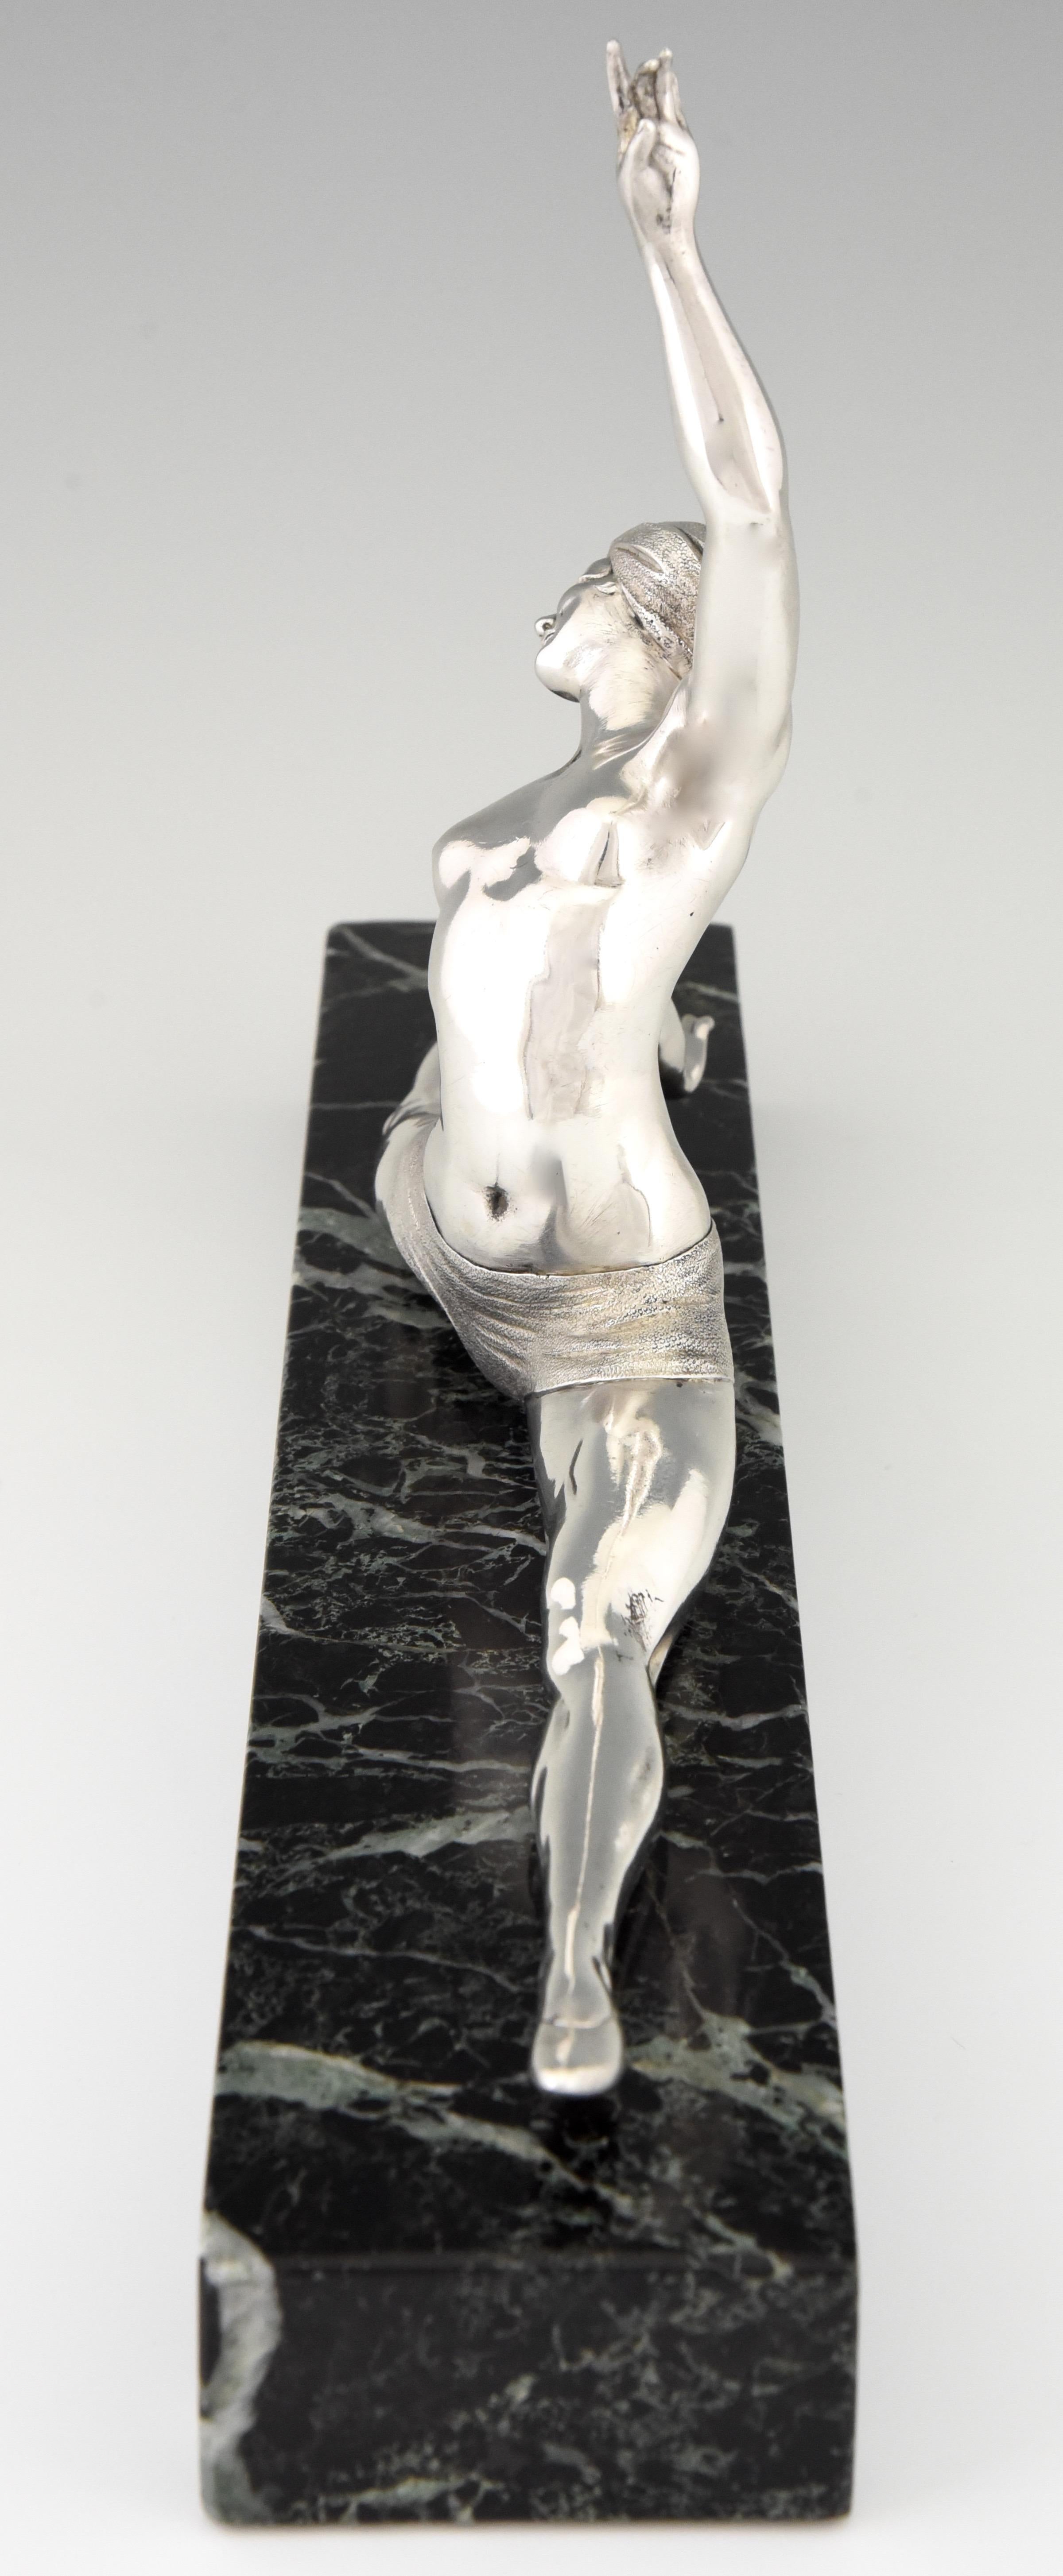 French Art Deco Silvered Bronze Sculpture Nude Dancer by Morante, France, 1925